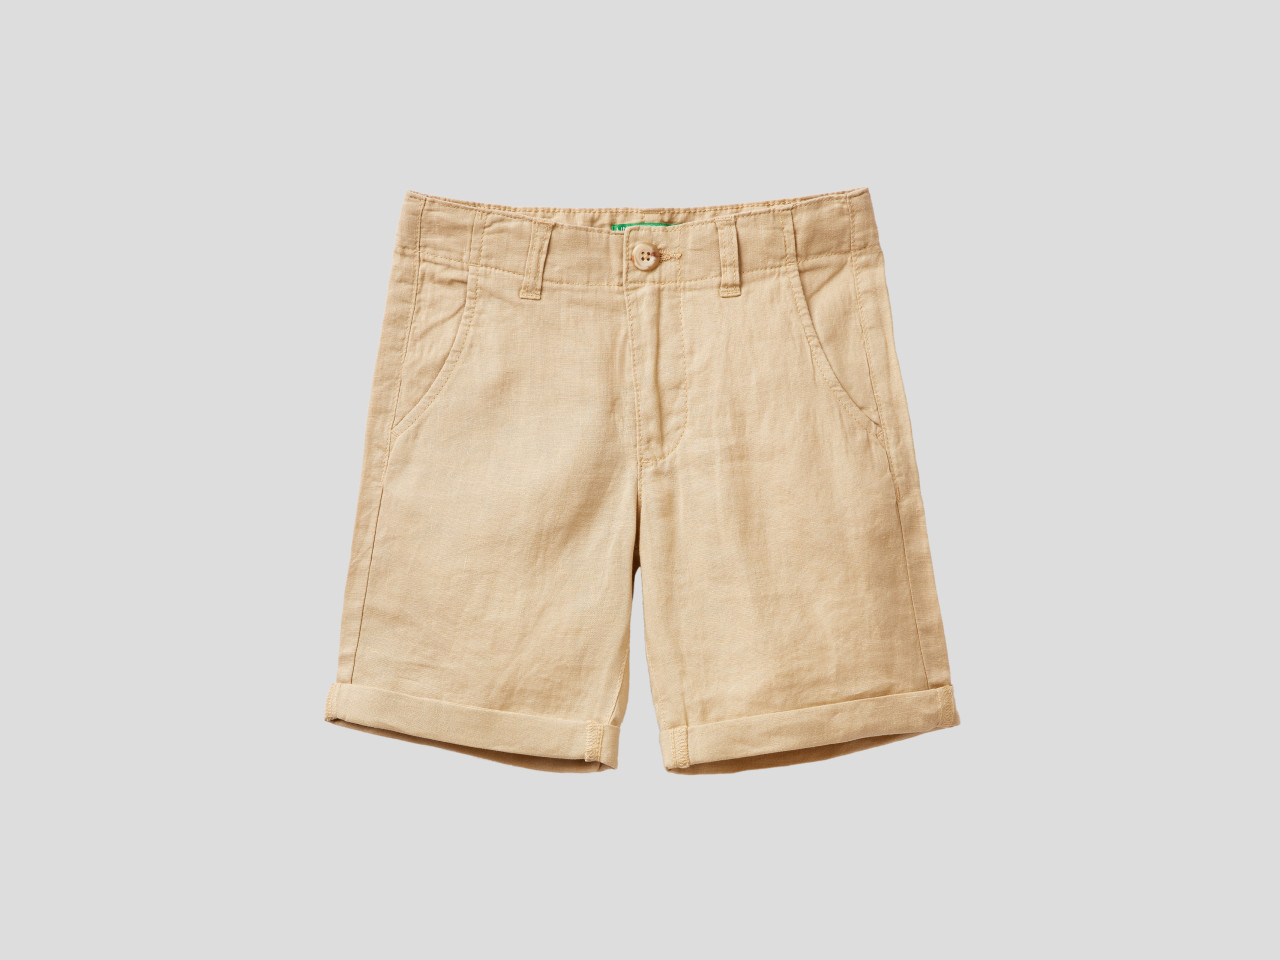 Benetton NWT United Colors of Benetton Boys Green Solid Cotton Pockets Shorts 